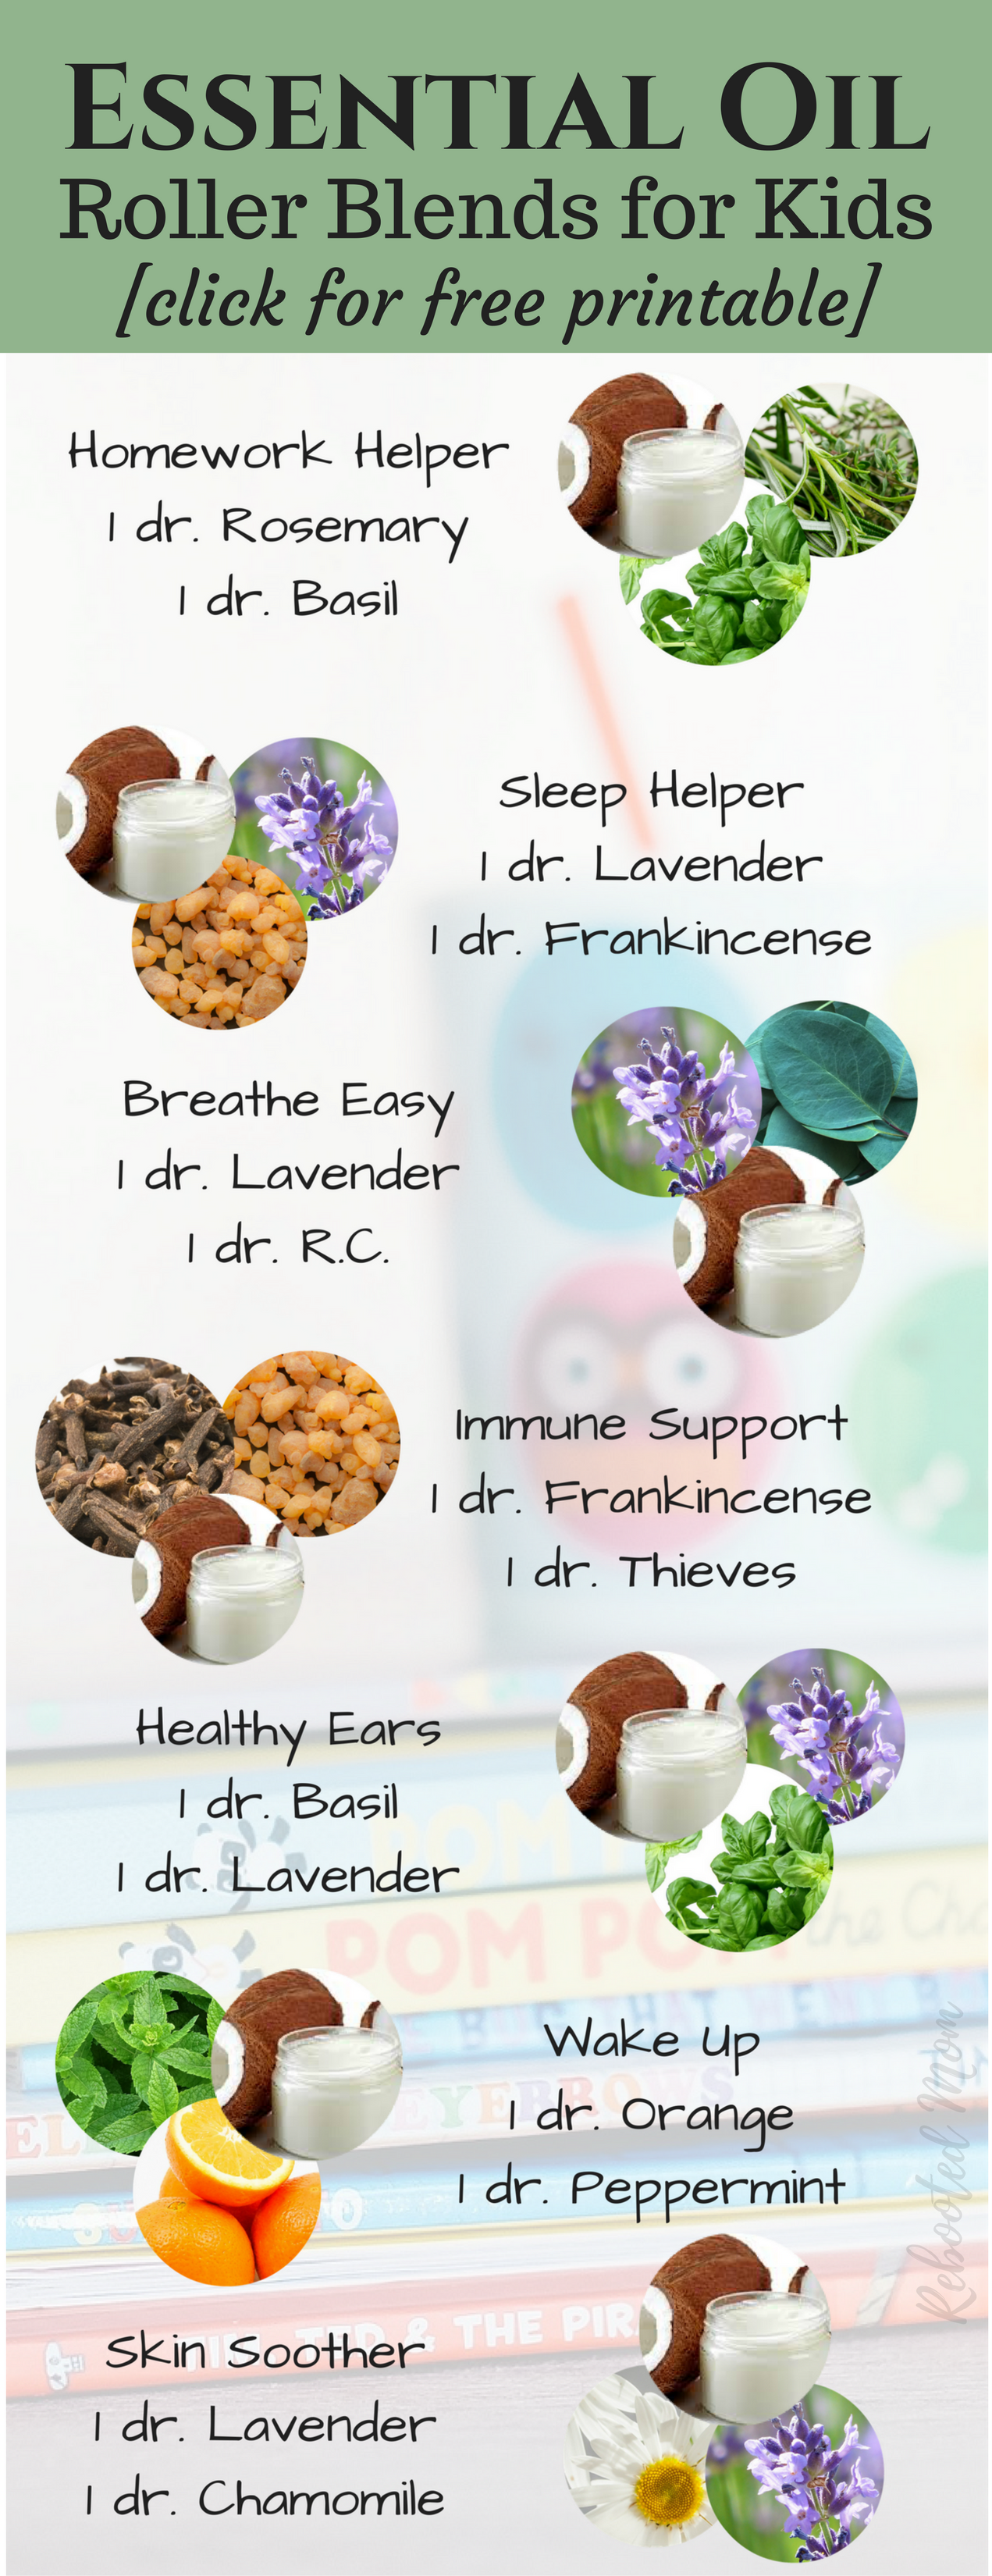 These essential oil roller blends for kids will help them sleep better, support cuts, scrapes and healthy ears, focus on homework and more. Get your FREE custom printable, too!